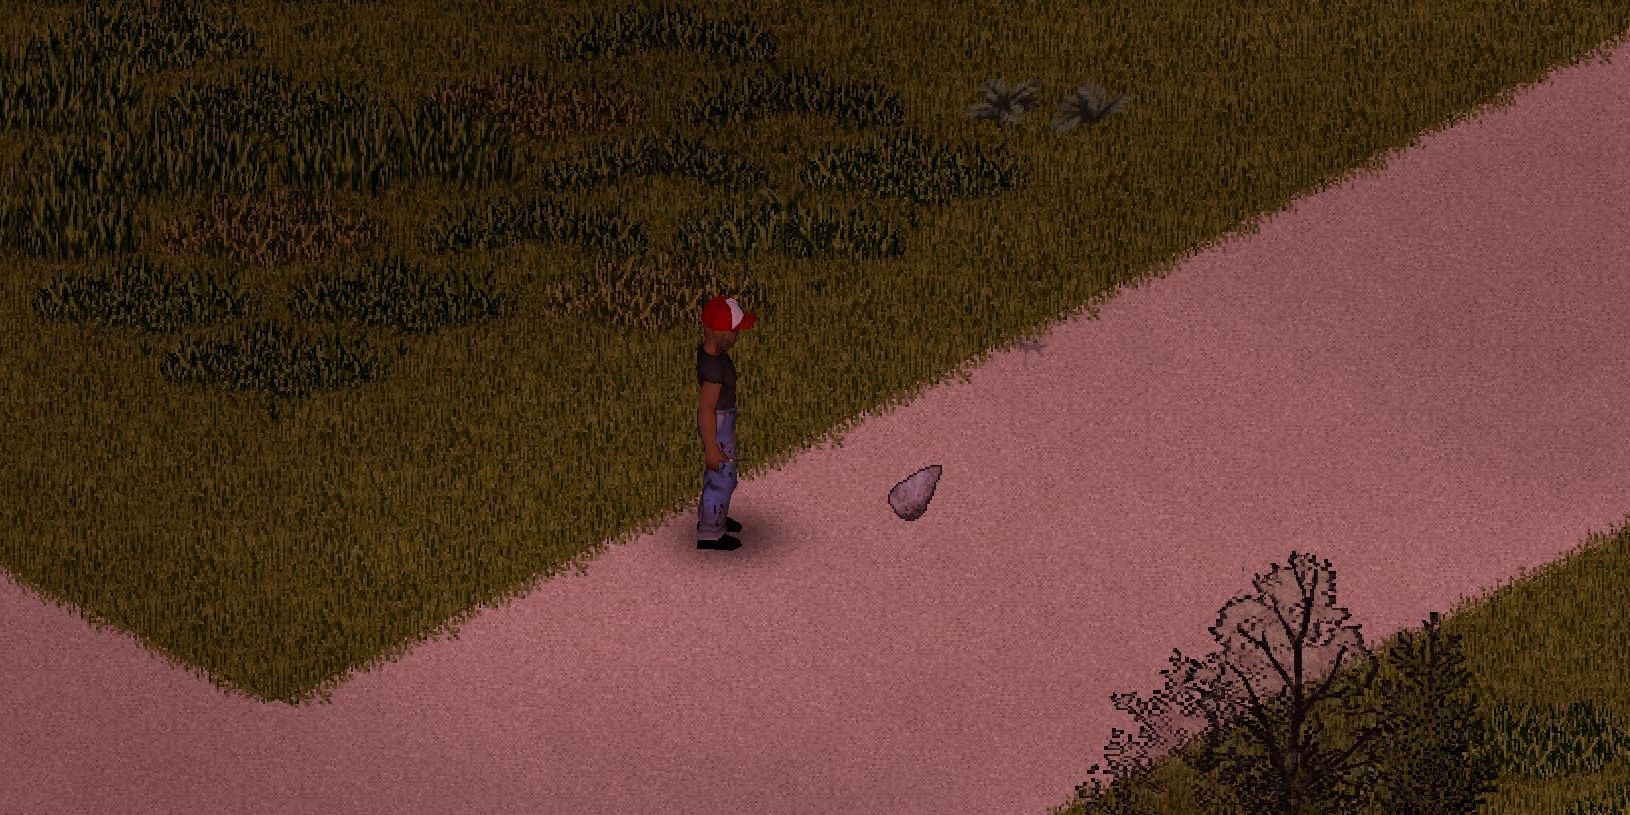 A chipped stone in Project Zomboid